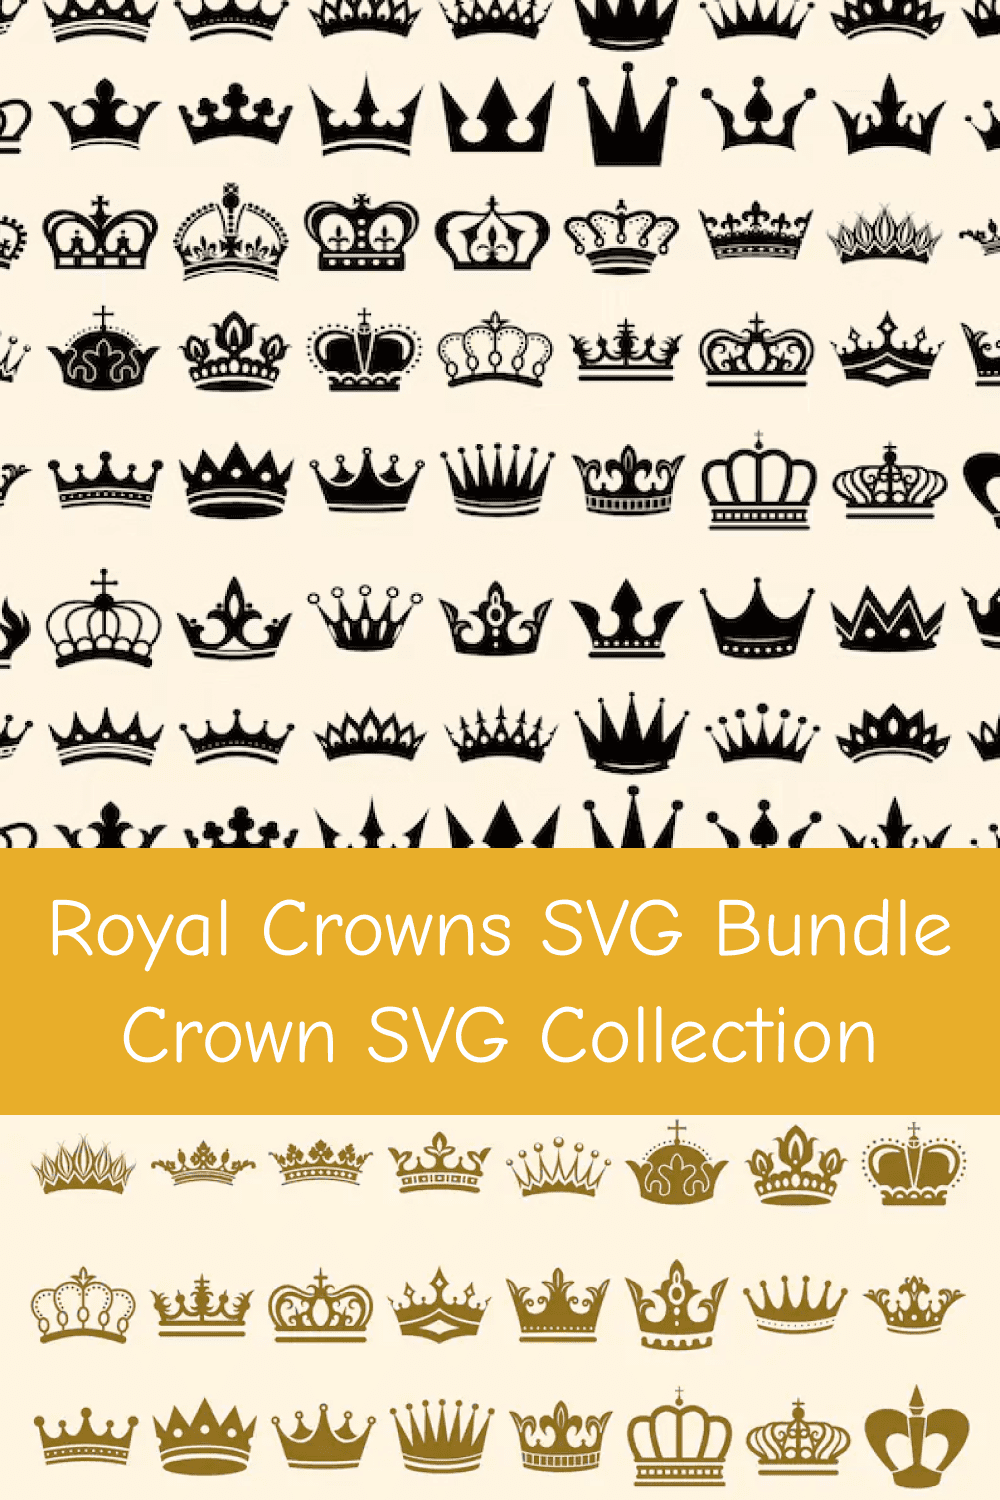 Creative crowns for you.